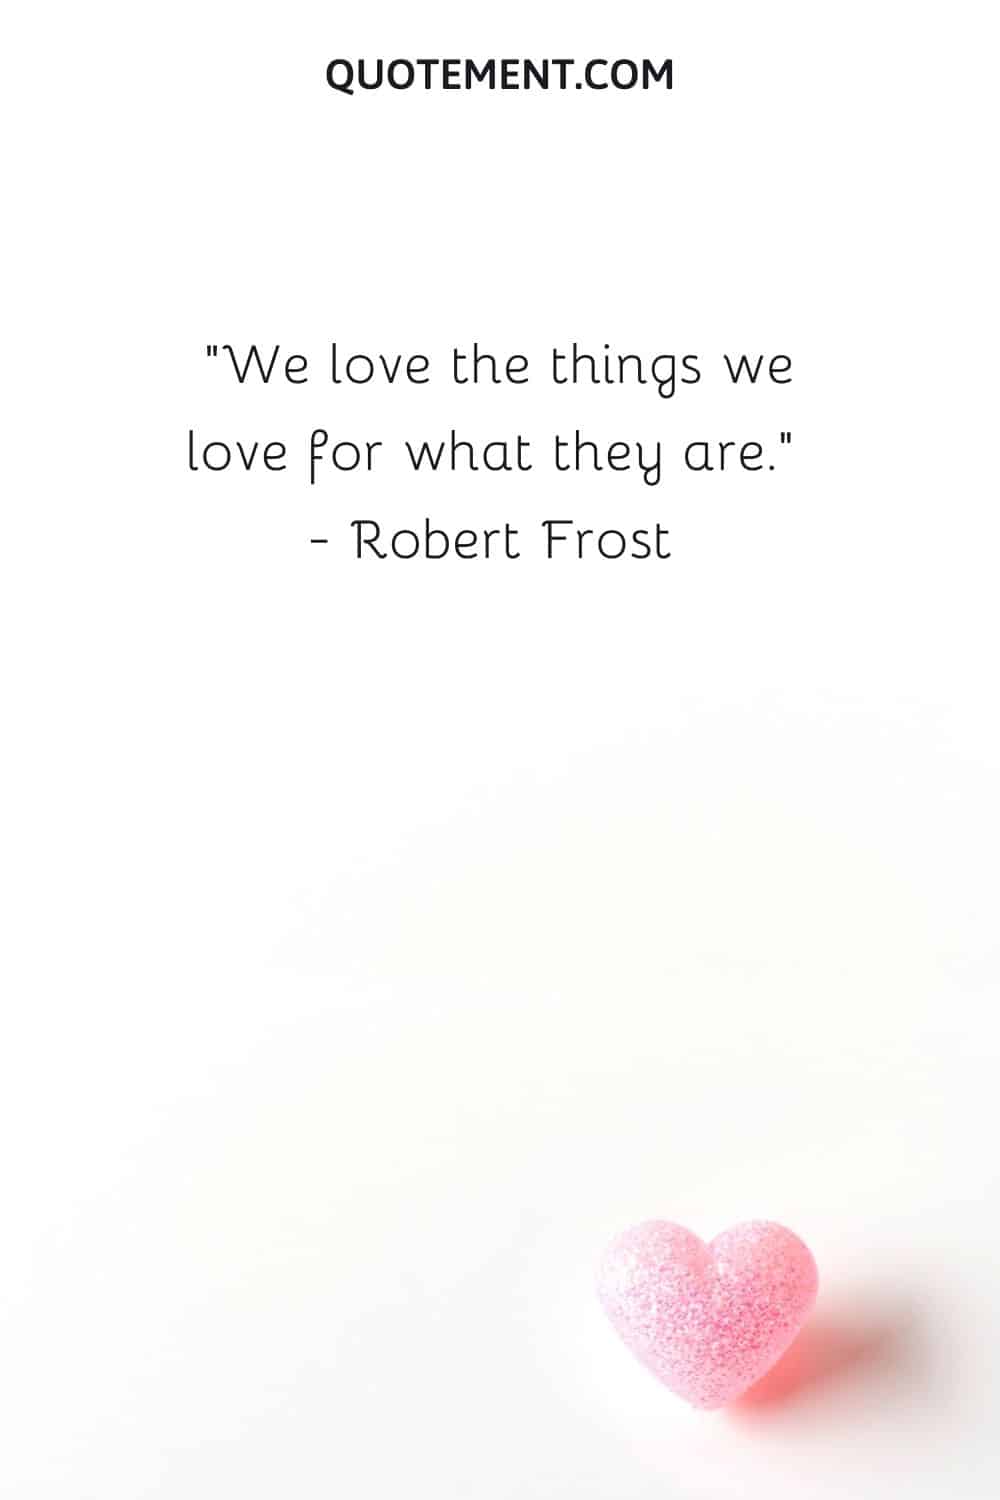 We love the things we love for what they are.